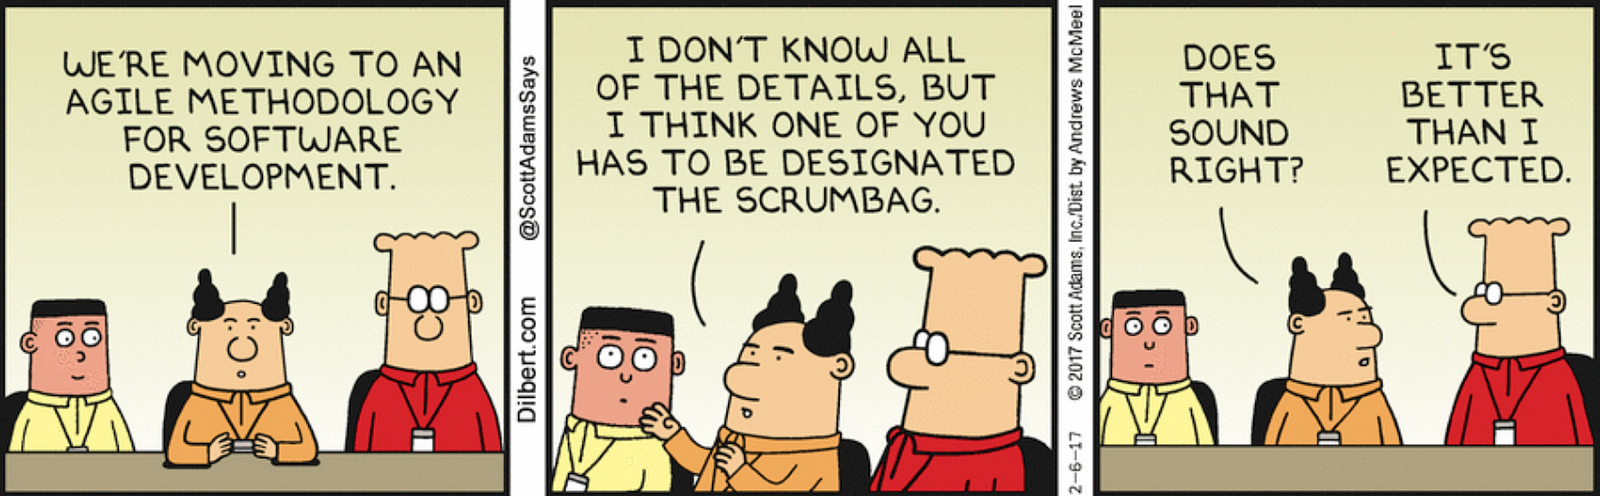 Dilbert cartoon about agile. “one of you has to be the designated scrumbag”